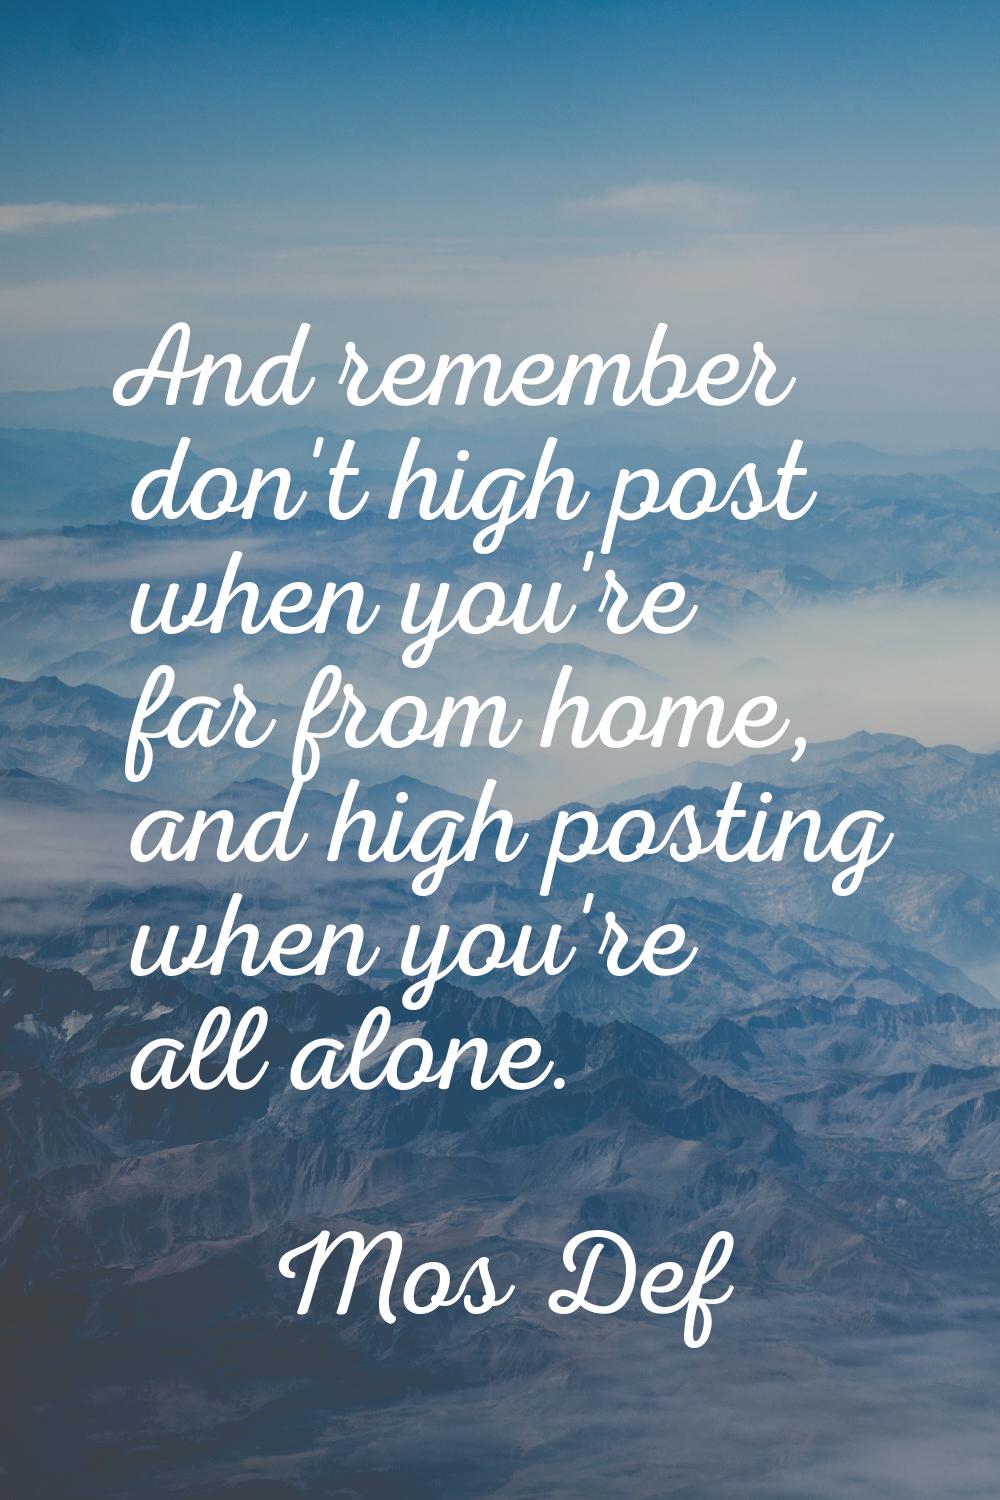 And remember don't high post when you're far from home, and high posting when you're all alone.